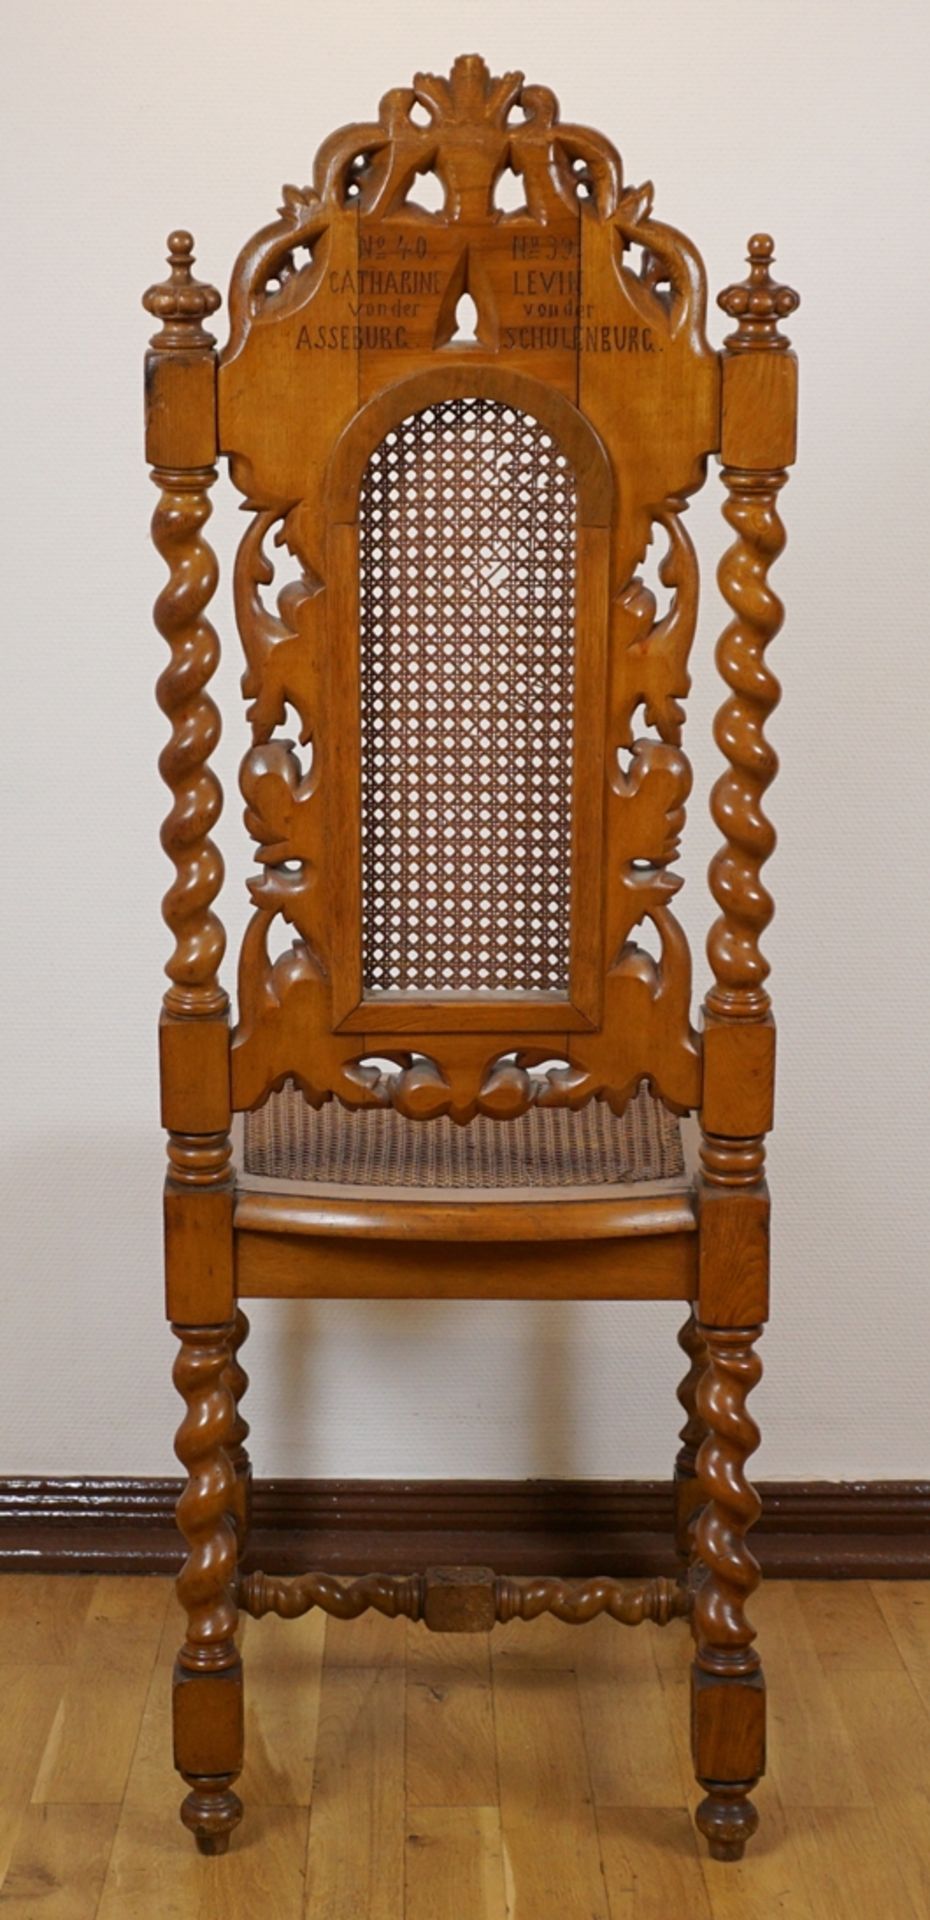 Historicism chair with coats of arms, end of 19th century - Image 4 of 5